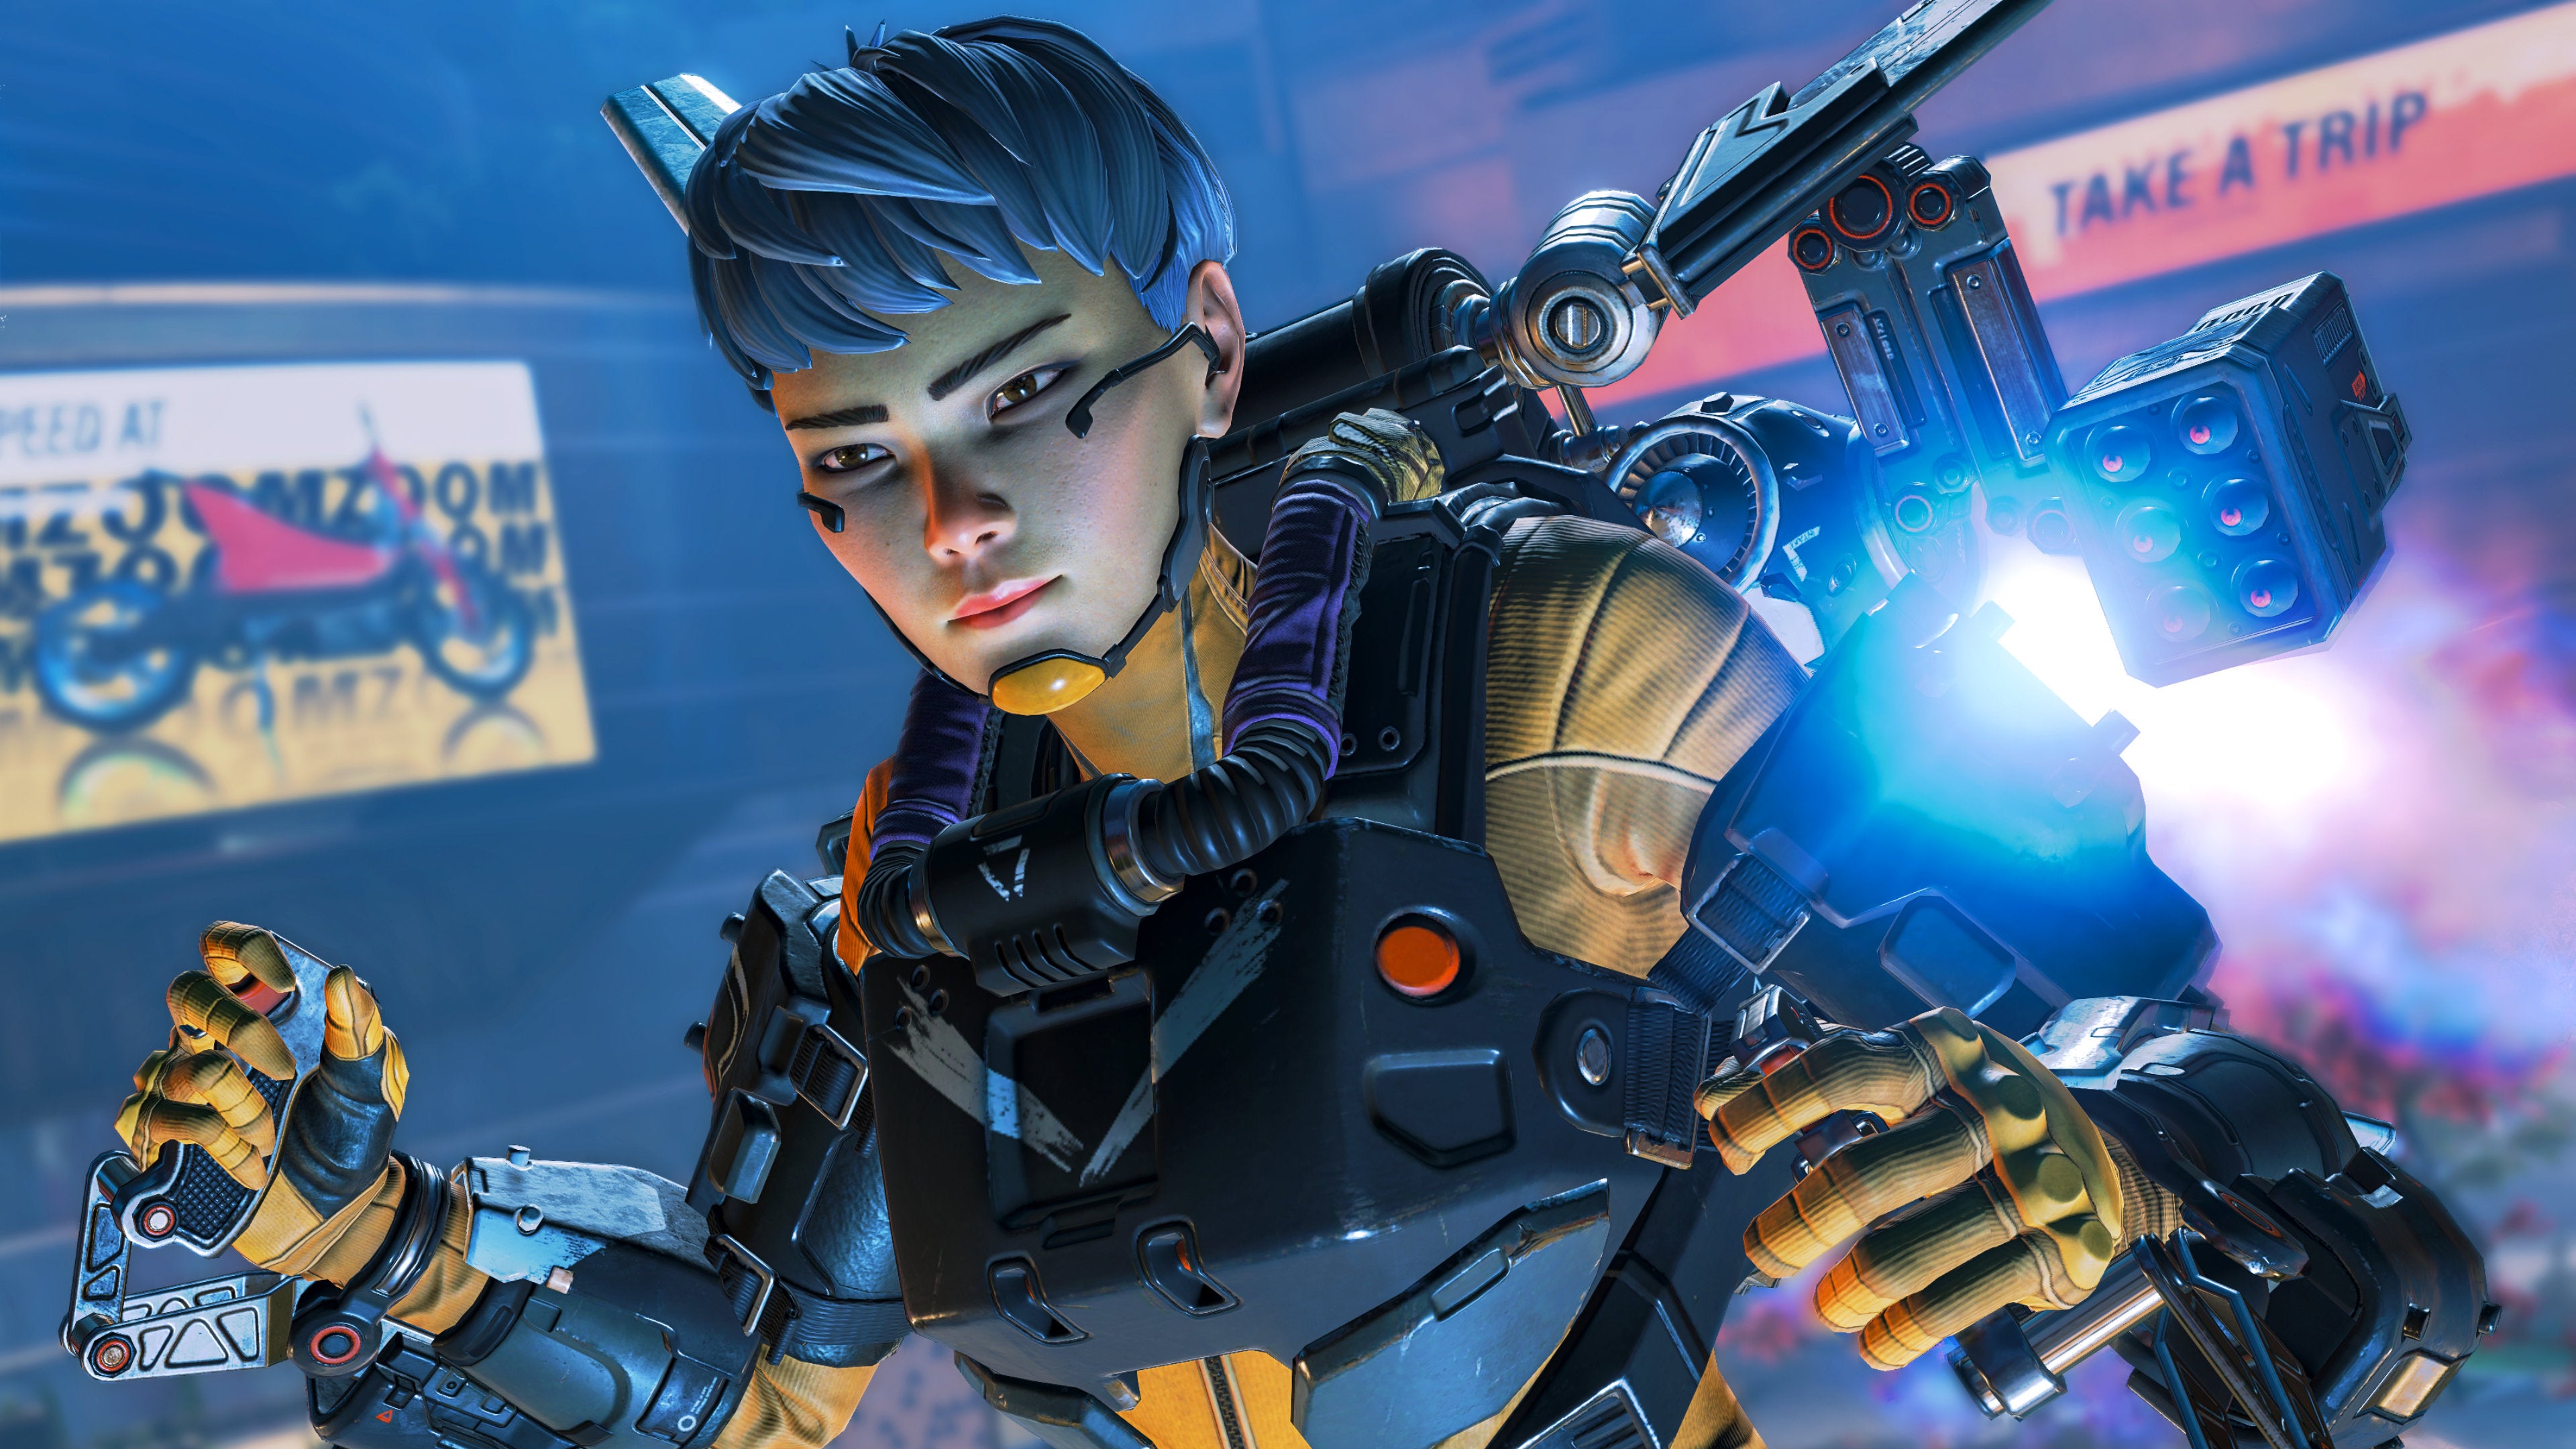 TheOGPepper on Twitter Free to use 4k Valkyrie Legacy wallpaper Welcome  officially erikaishii to the Apex Community proud to have you with us  With PlayApex Legacy I want to serious up my